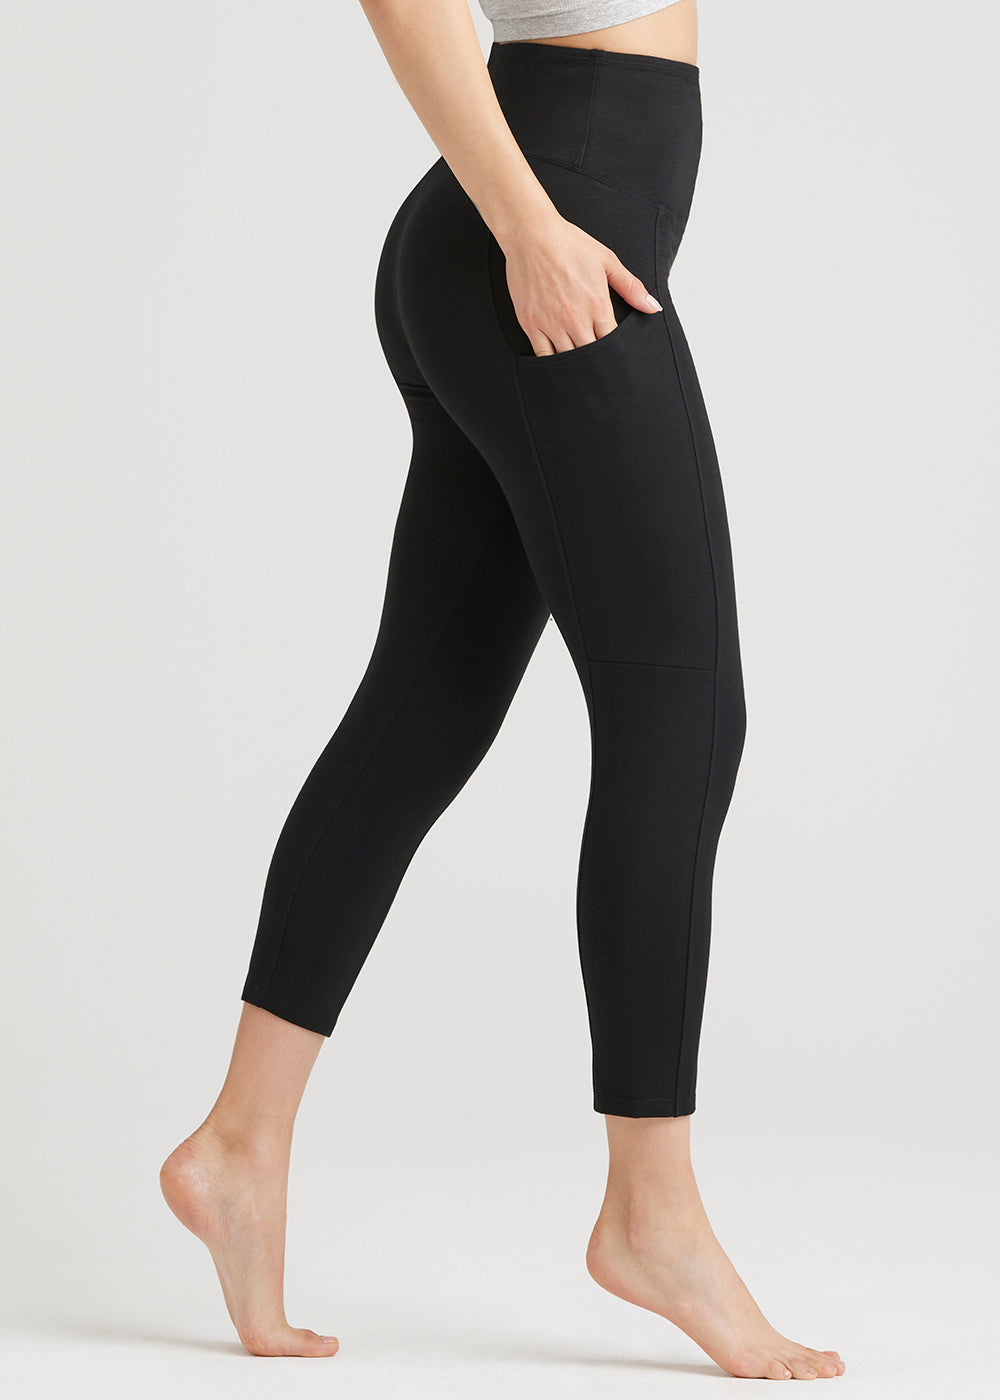 Buy LYRA Hot Chocolate Superior staple cotton Ankle Length Leggings.Look  like new even after repeated washing,Suitably designed to mould any body  shape perfectly. Online at Best Prices in India - JioMart.